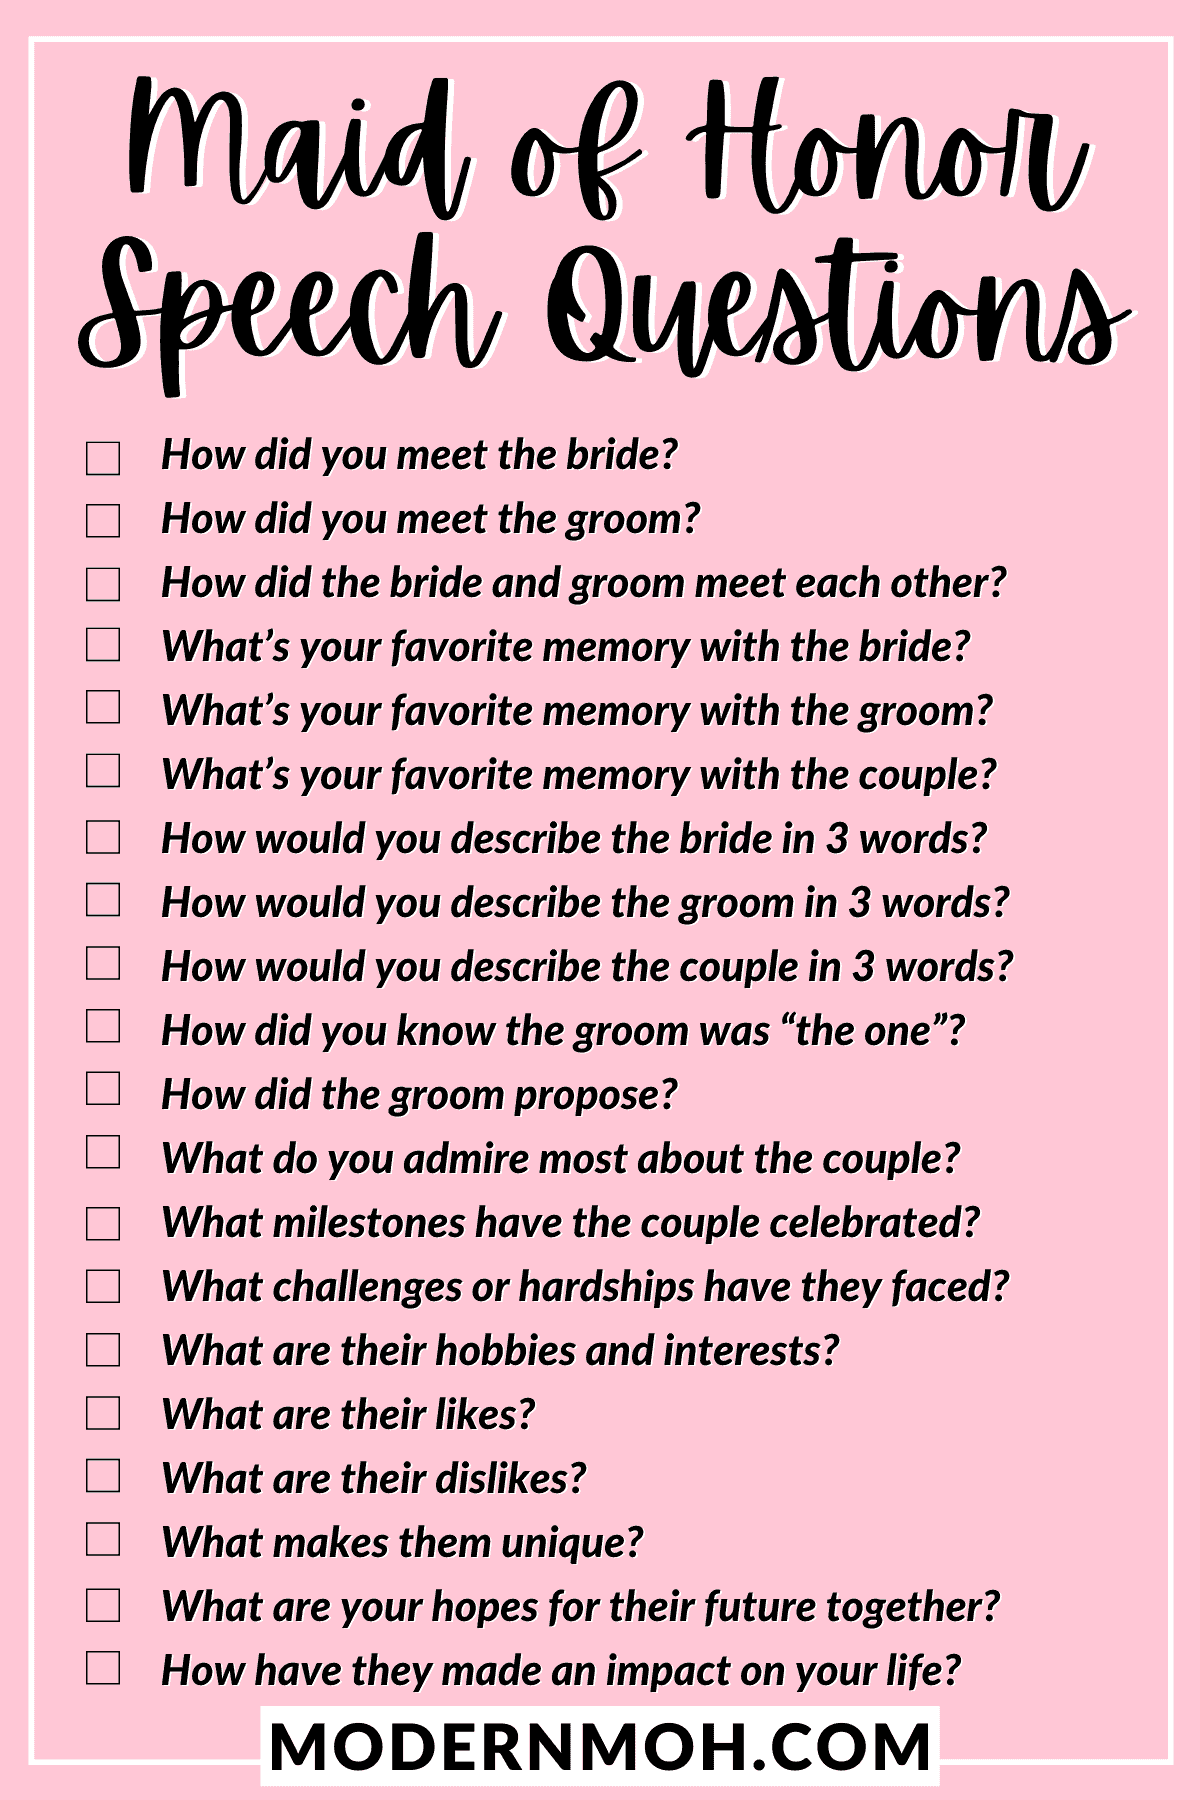 maid of honor speech questions 1